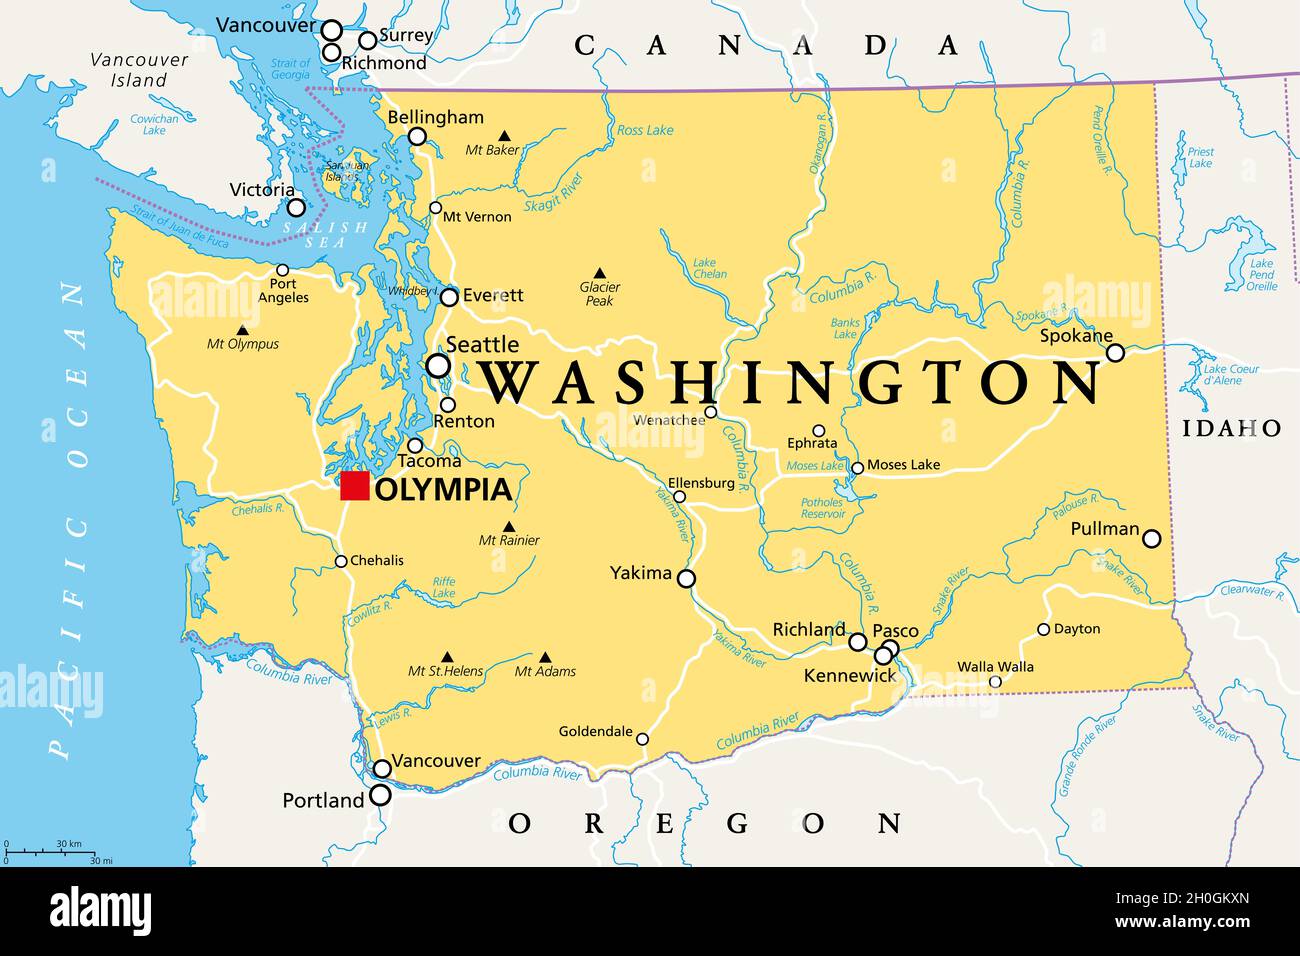 Washington, WA, political map with the capital Olympia. State in the Pacific Northwest region of the Western United States of America. Stock Photo